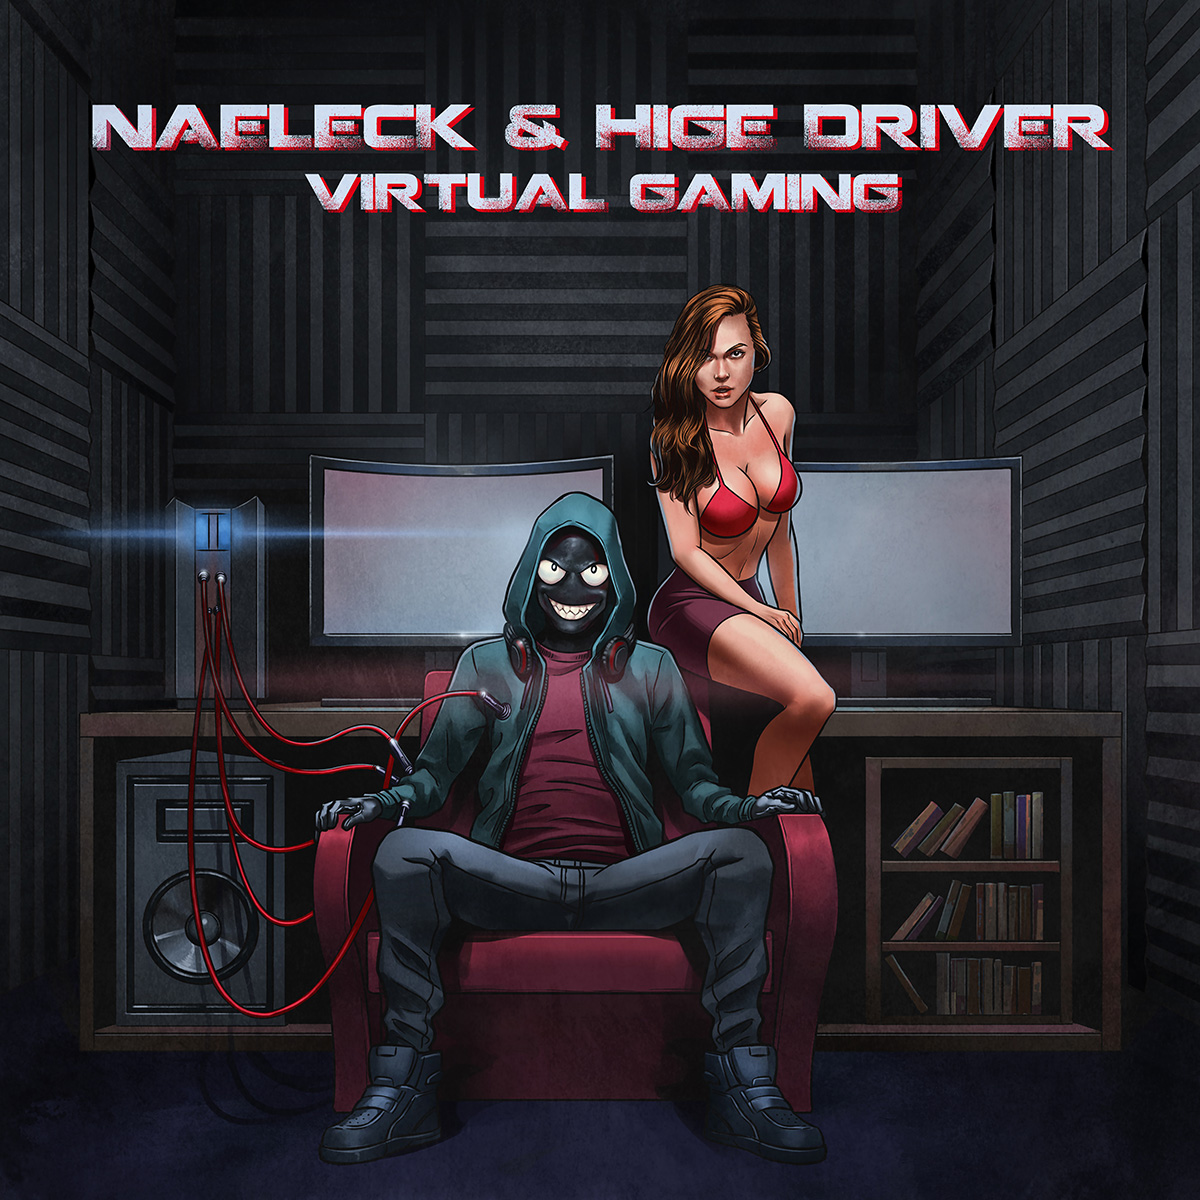 Naeleck & Hige Driver Deliver Video Game Inspired “Virtual Gaming”